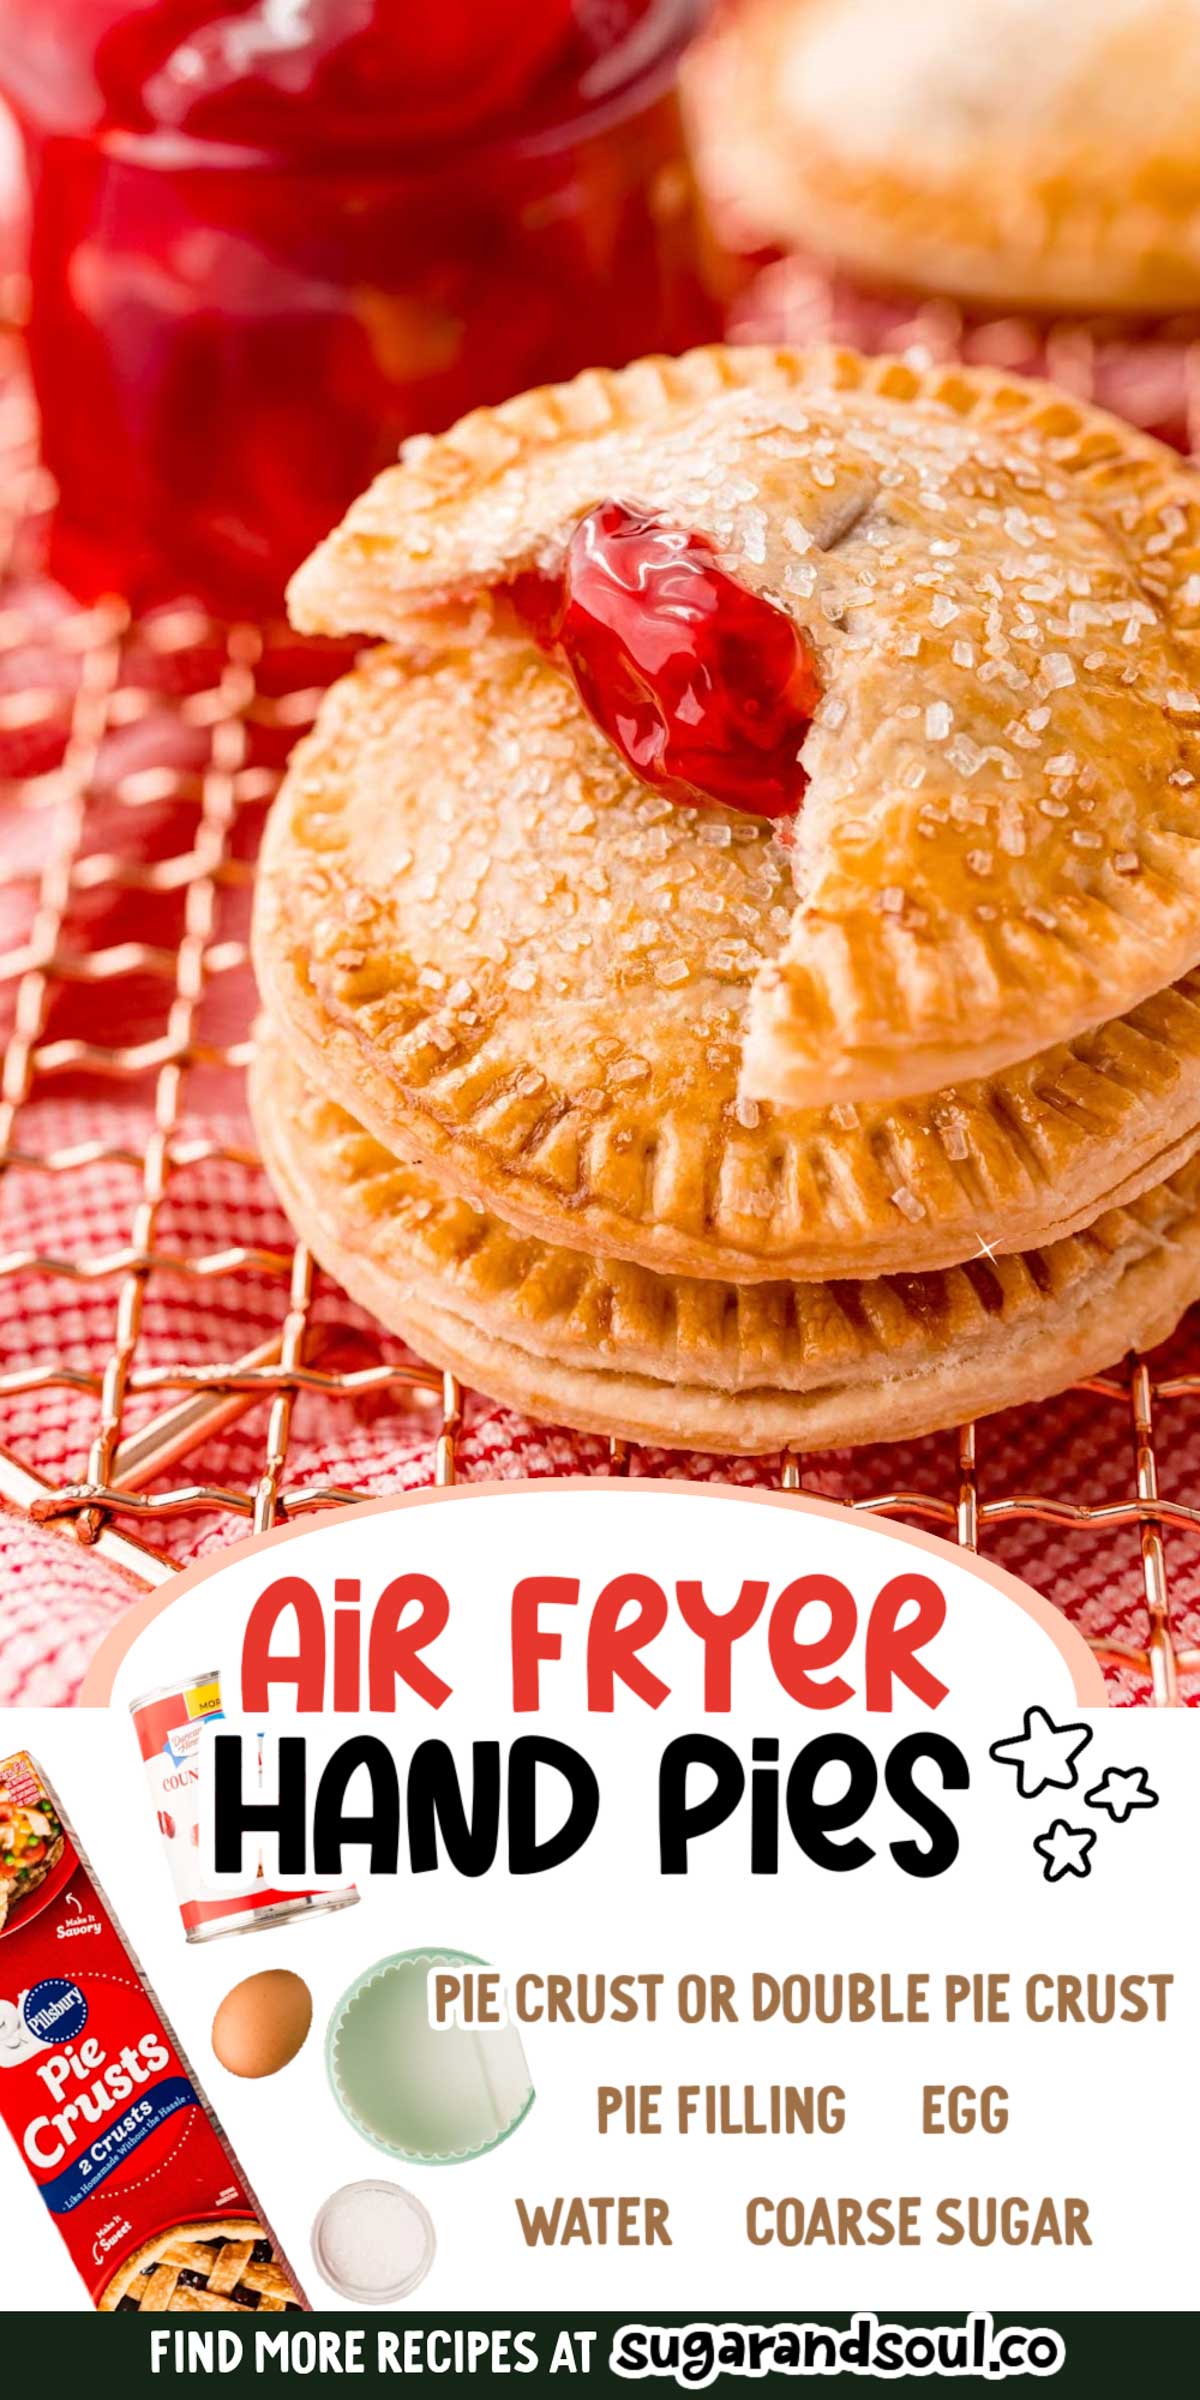 These Air Fryer Hand Pies are a delicious treat that’s ready in under 20 minutes using only 4 ingredients and are completely customizable to your preferred filling!  via @sugarandsoulco